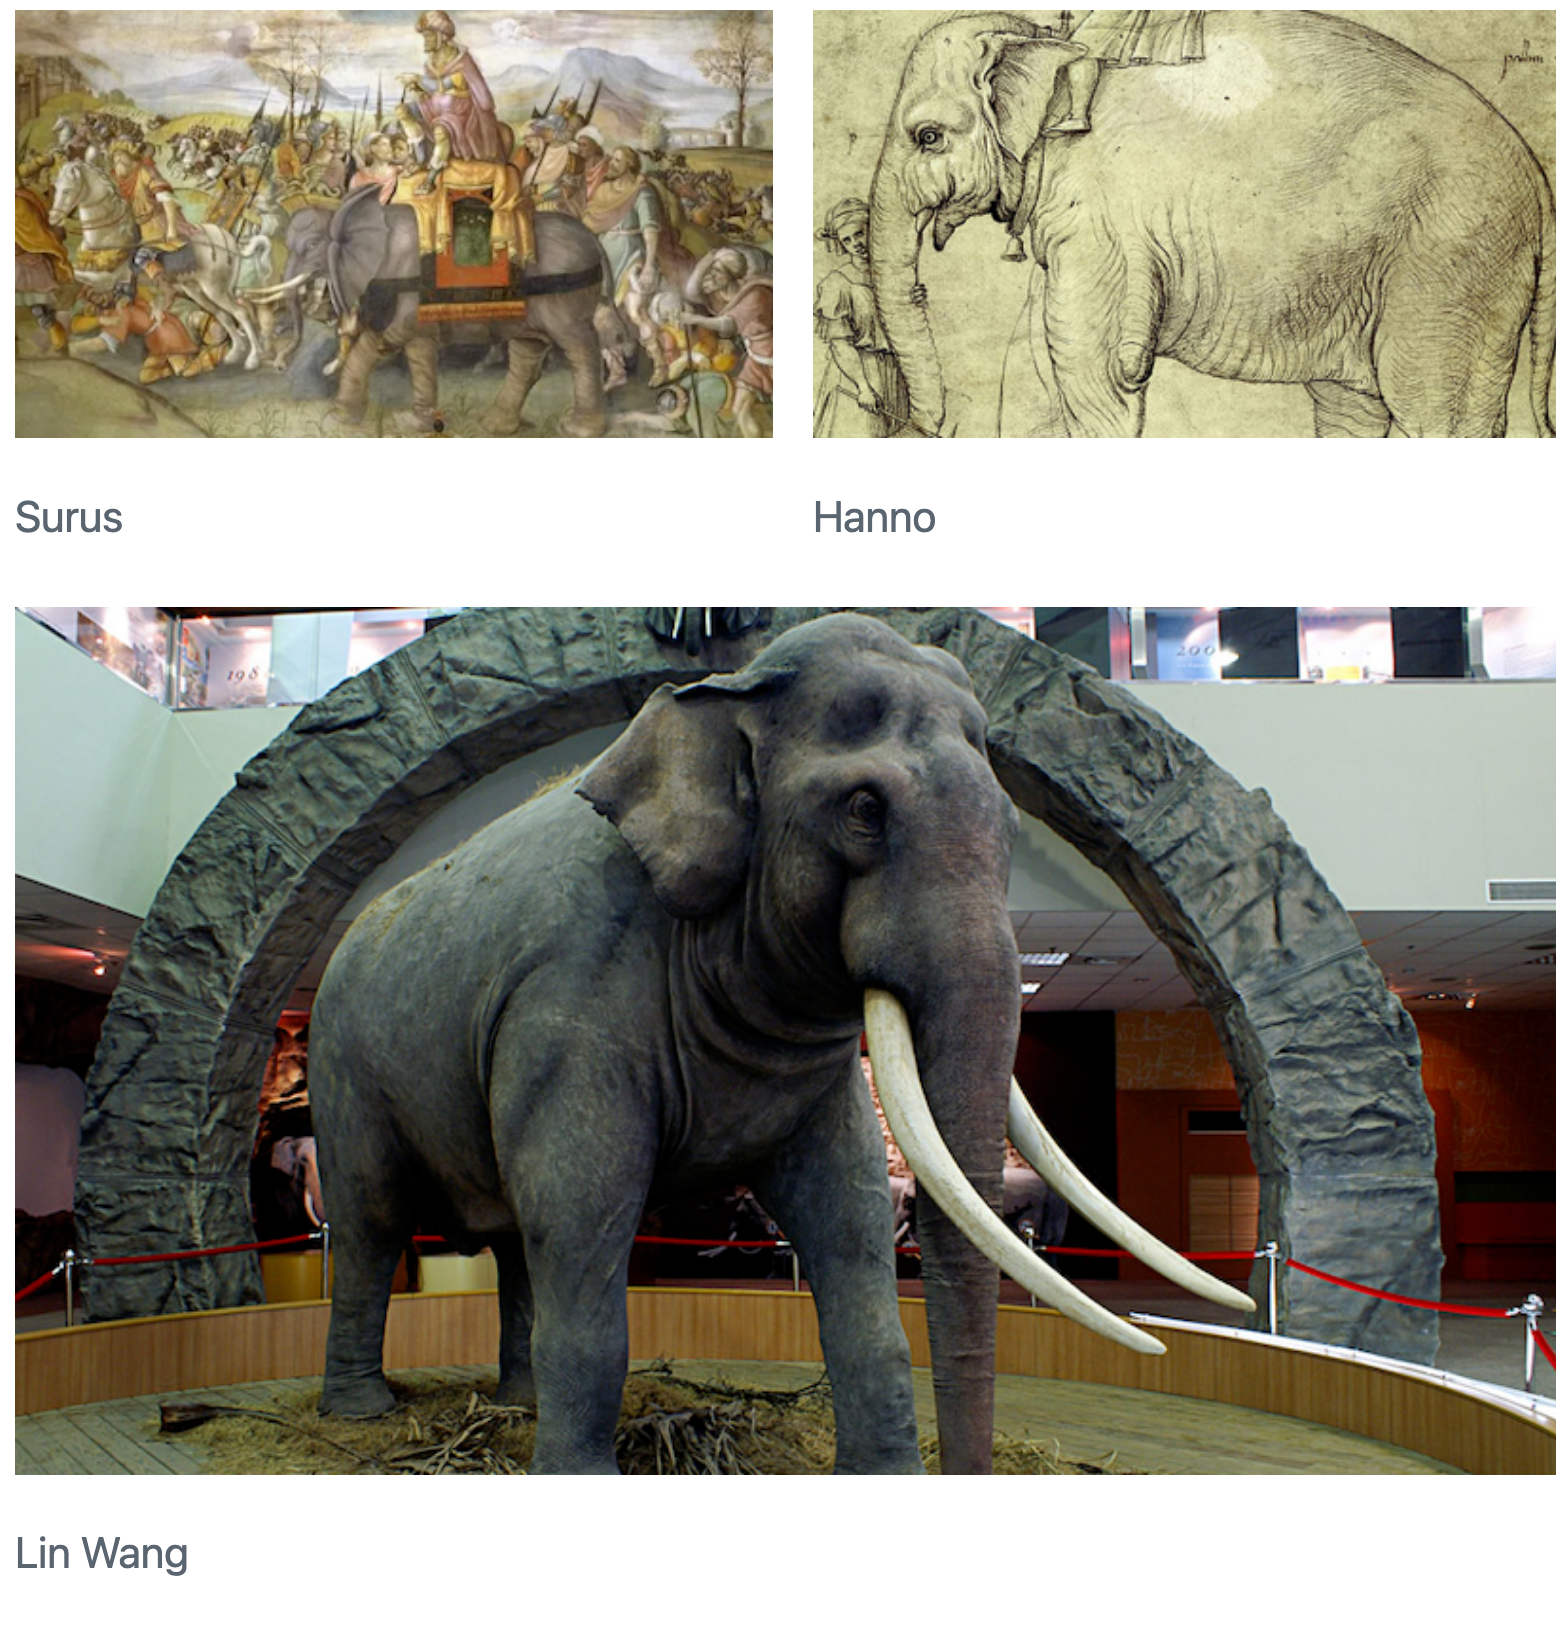 Three elephant images are displayed: two side-by-side on the top row, captioned 'Surus' and 'Hanno', with a third image, 'Lin Wang', directly below spanning the width of the first two.